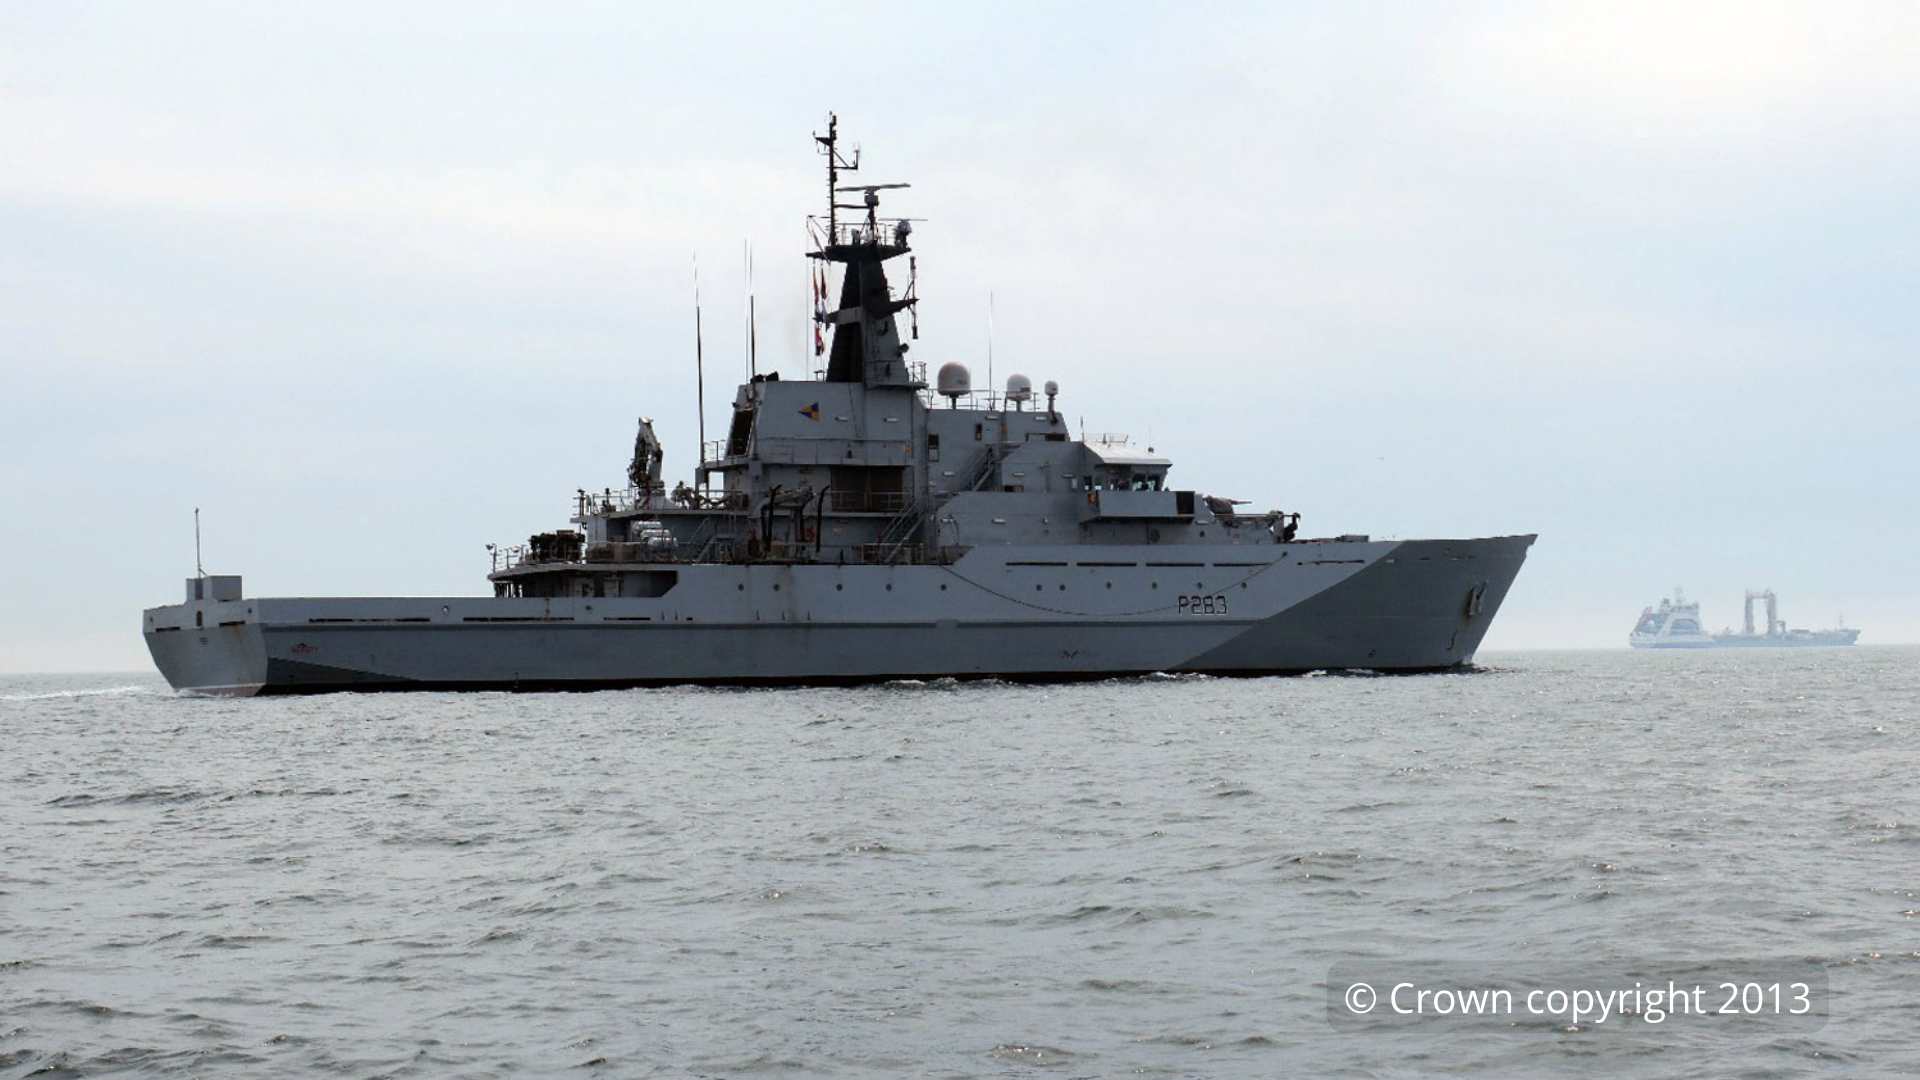 Royal Navy tracks Russian vessel through the Channel